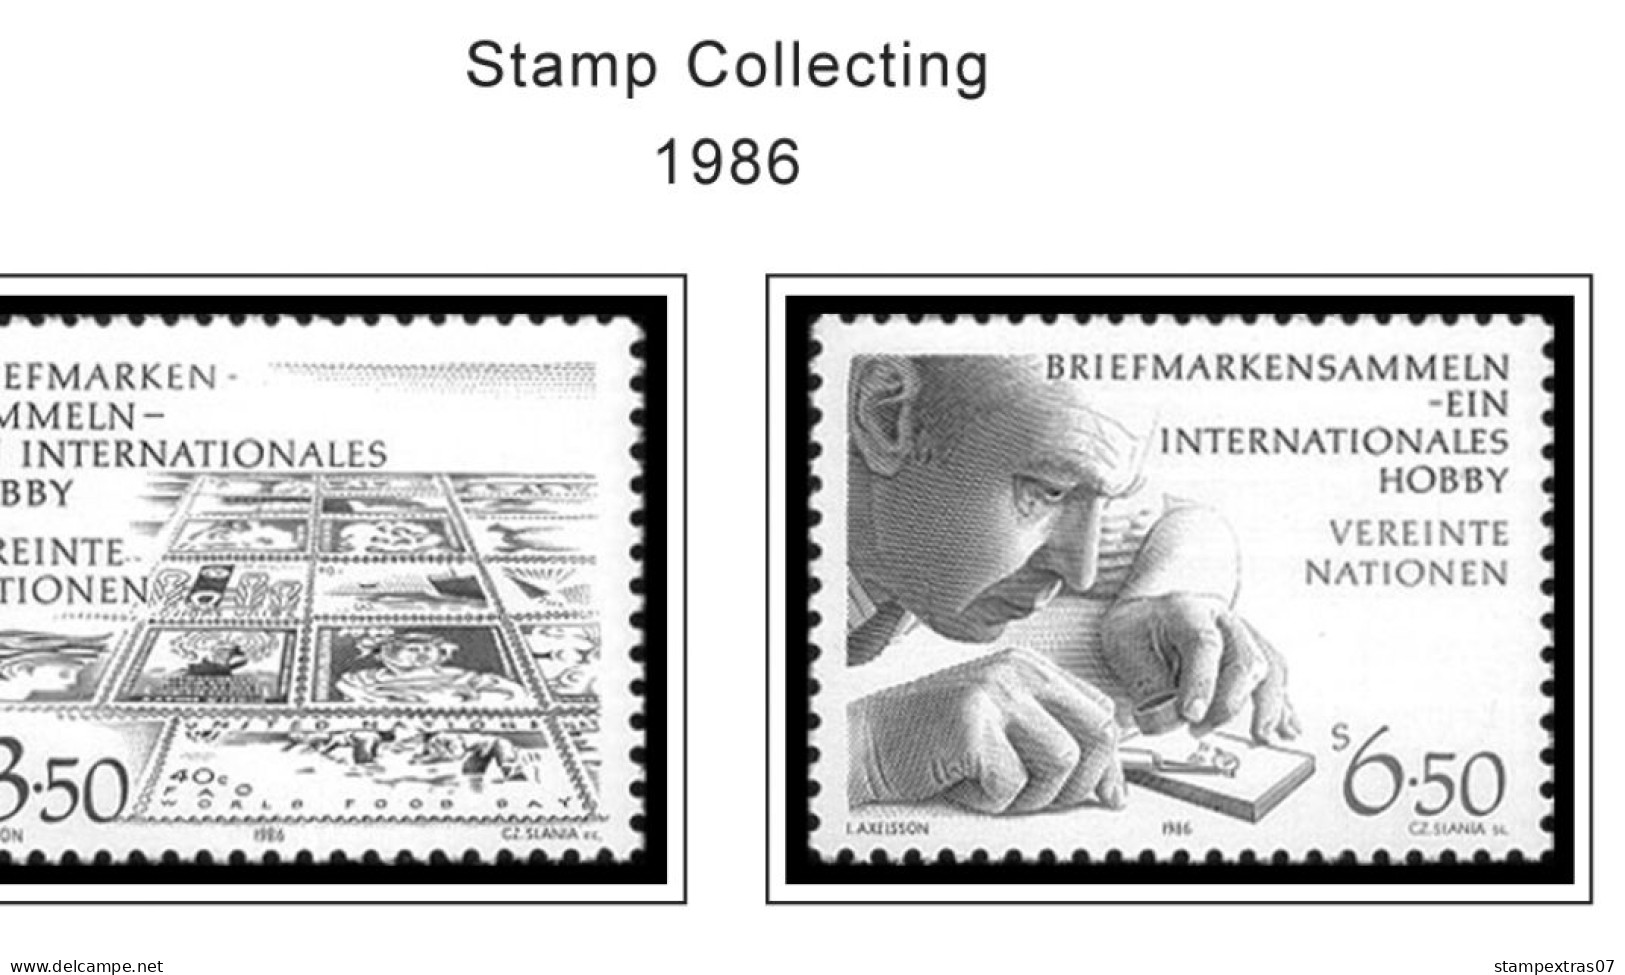 UNITED NATIONS - VIENNA 1979-2020 STAMP ALBUM PAGES (165 B&w Illustrated Pages) - Inglés